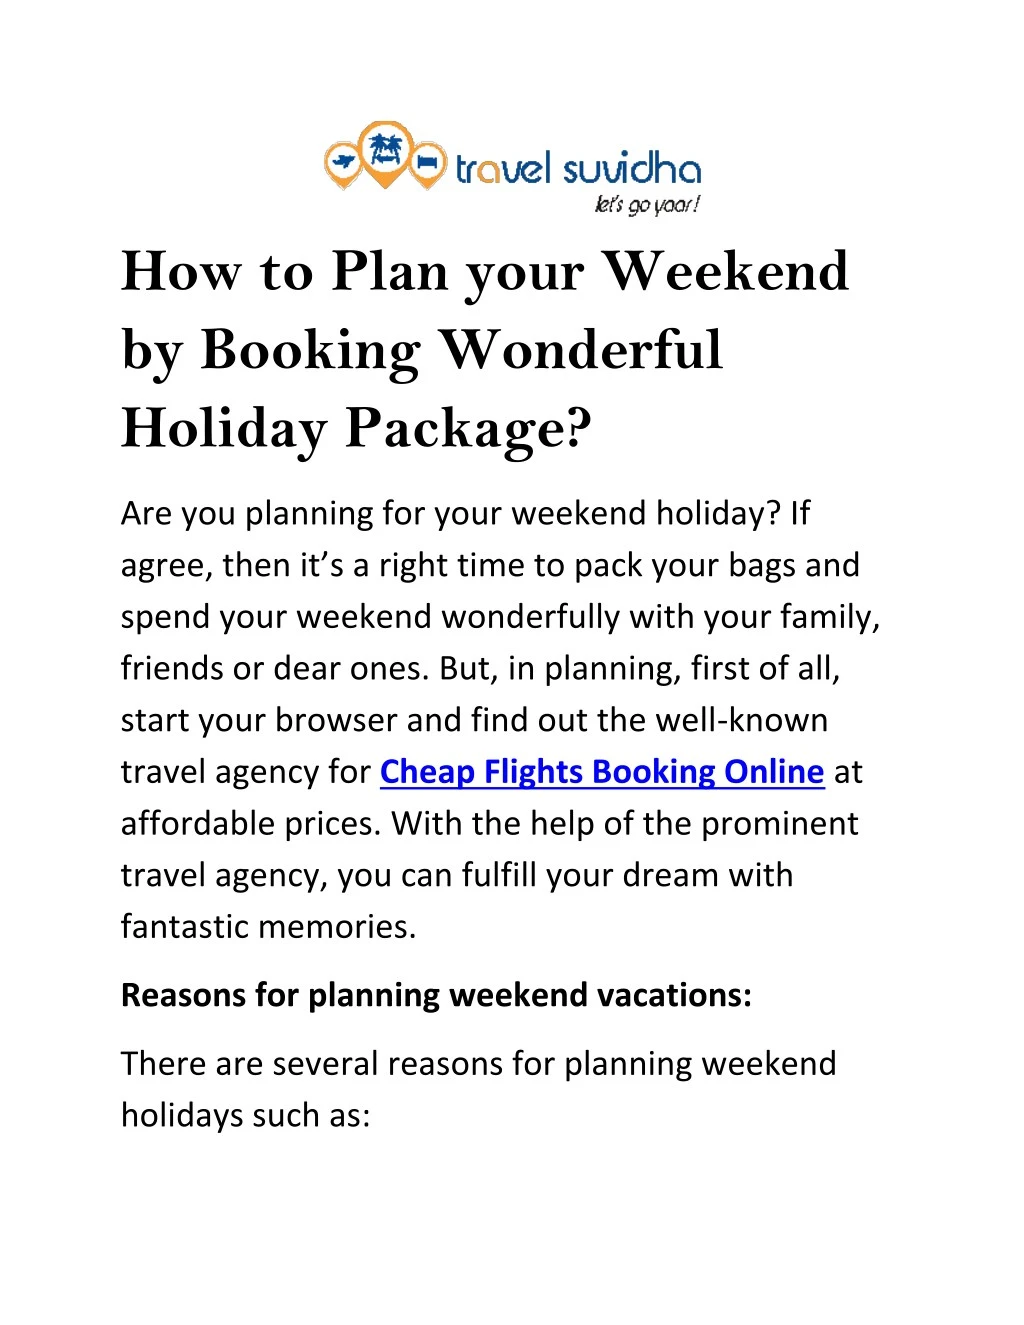 how to plan your weekend by booking wonderful